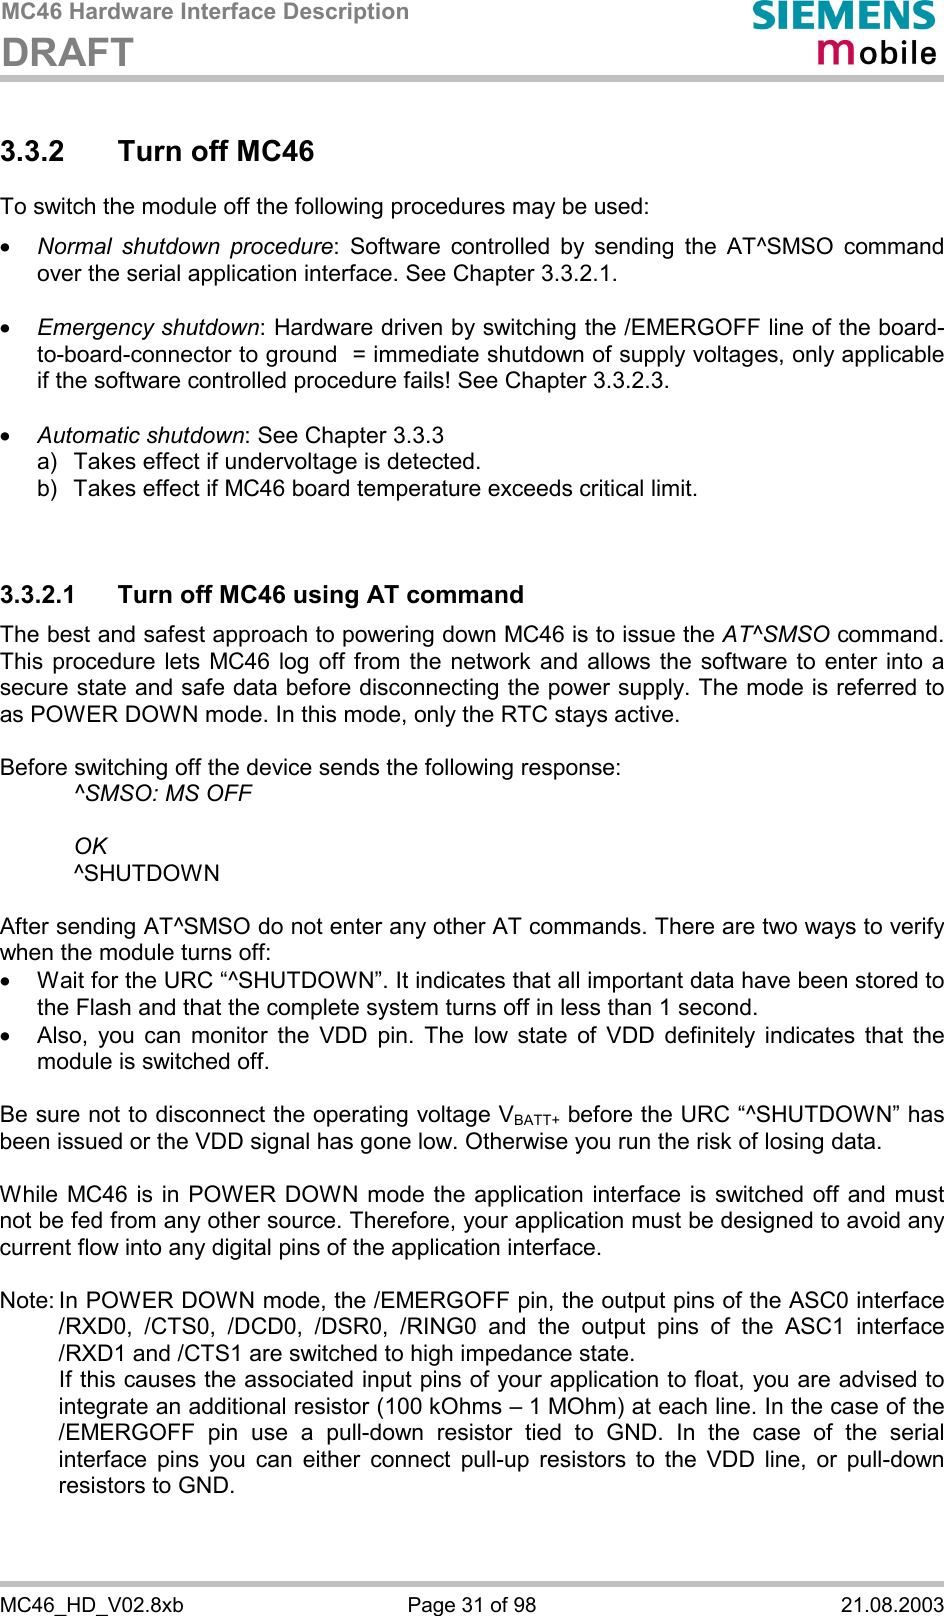 MC46 Hardware Interface Description DRAFT      MC46_HD_V02.8xb  Page 31 of 98  21.08.2003 3.3.2  Turn off MC46 To switch the module off the following procedures may be used:  ·  Normal shutdown procedure: Software controlled by sending the AT^SMSO command over the serial application interface. See Chapter 3.3.2.1.  ·  Emergency shutdown: Hardware driven by switching the /EMERGOFF line of the board-to-board-connector to ground  = immediate shutdown of supply voltages, only applicable if the software controlled procedure fails! See Chapter 3.3.2.3.  ·  Automatic shutdown: See Chapter 3.3.3 a)   Takes effect if undervoltage is detected.  b)   Takes effect if MC46 board temperature exceeds critical limit.   3.3.2.1  Turn off MC46 using AT command The best and safest approach to powering down MC46 is to issue the AT^SMSO command. This procedure lets MC46 log off from the network and allows the software to enter into a secure state and safe data before disconnecting the power supply. The mode is referred to as POWER DOWN mode. In this mode, only the RTC stays active.  Before switching off the device sends the following response:      ^SMSO: MS OFF    OK   ^SHUTDOWN  After sending AT^SMSO do not enter any other AT commands. There are two ways to verify when the module turns off:  ·  Wait for the URC “^SHUTDOWN”. It indicates that all important data have been stored to the Flash and that the complete system turns off in less than 1 second. ·  Also, you can monitor the VDD pin. The low state of VDD definitely indicates that the module is switched off.  Be sure not to disconnect the operating voltage VBATT+ before the URC “^SHUTDOWN” has been issued or the VDD signal has gone low. Otherwise you run the risk of losing data.   While MC46 is in POWER DOWN mode the application interface is switched off and must not be fed from any other source. Therefore, your application must be designed to avoid any current flow into any digital pins of the application interface.   Note: In POWER DOWN mode, the /EMERGOFF pin, the output pins of the ASC0 interface /RXD0, /CTS0, /DCD0, /DSR0, /RING0 and the output pins of the ASC1 interface /RXD1 and /CTS1 are switched to high impedance state.    If this causes the associated input pins of your application to float, you are advised to integrate an additional resistor (100 kOhms – 1 MOhm) at each line. In the case of the /EMERGOFF pin use a pull-down resistor tied to GND. In the case of the serial interface pins you can either connect pull-up resistors to the VDD line, or pull-down resistors to GND.   